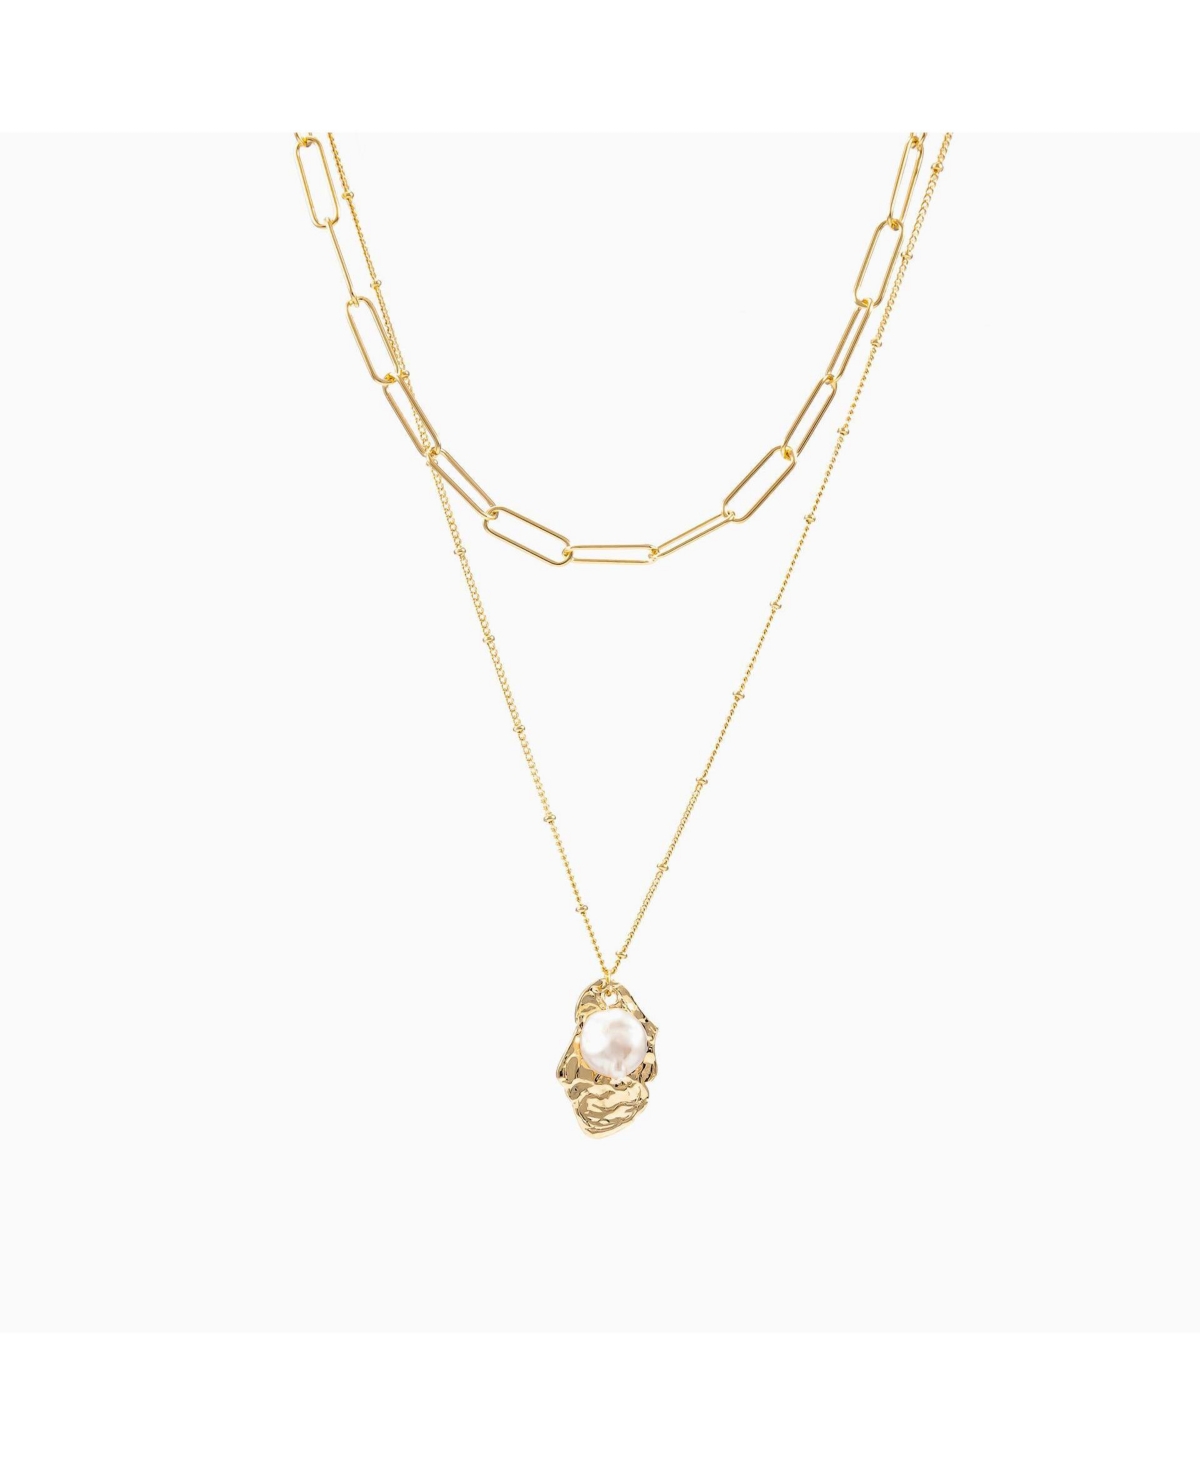 Donna Layered Necklace with Culture Pealr Pendant - Gold